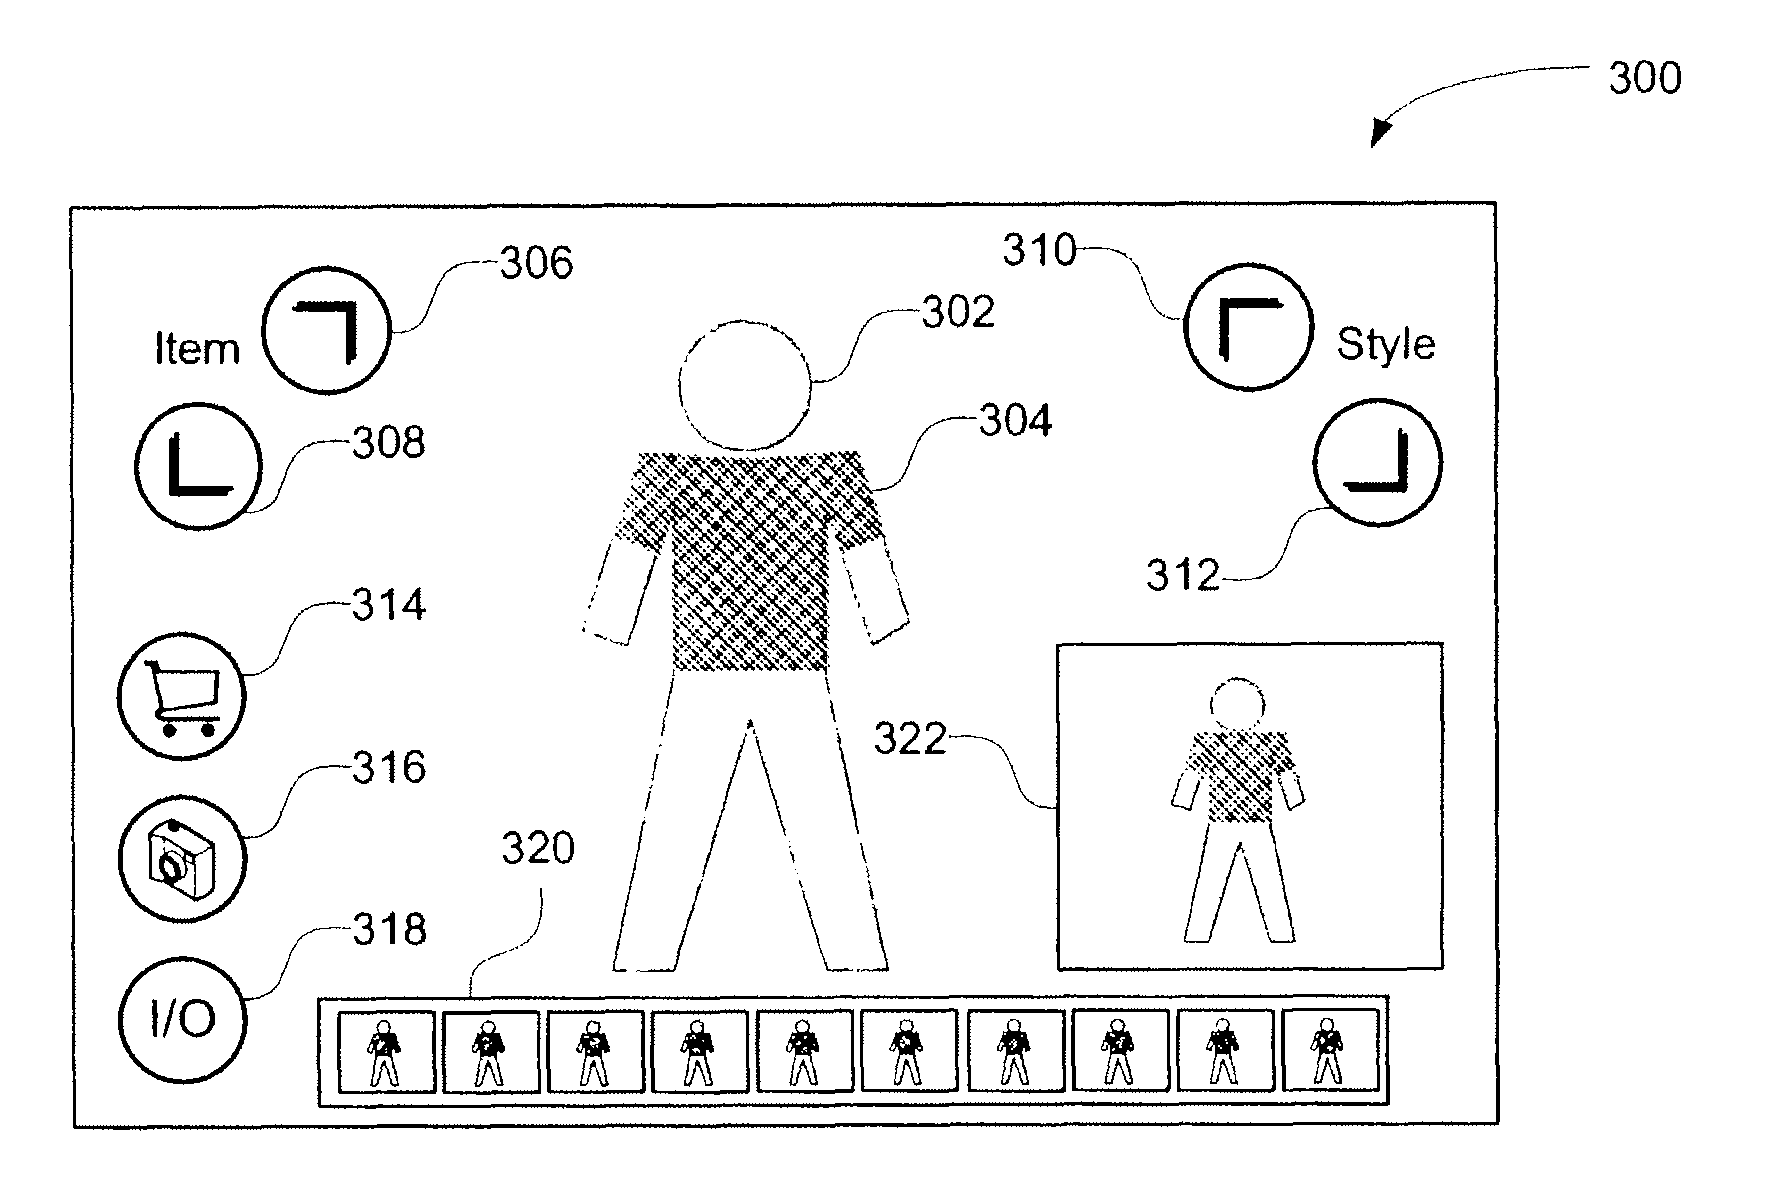 Providing a simulation of wearing items such as garments and/or accessories